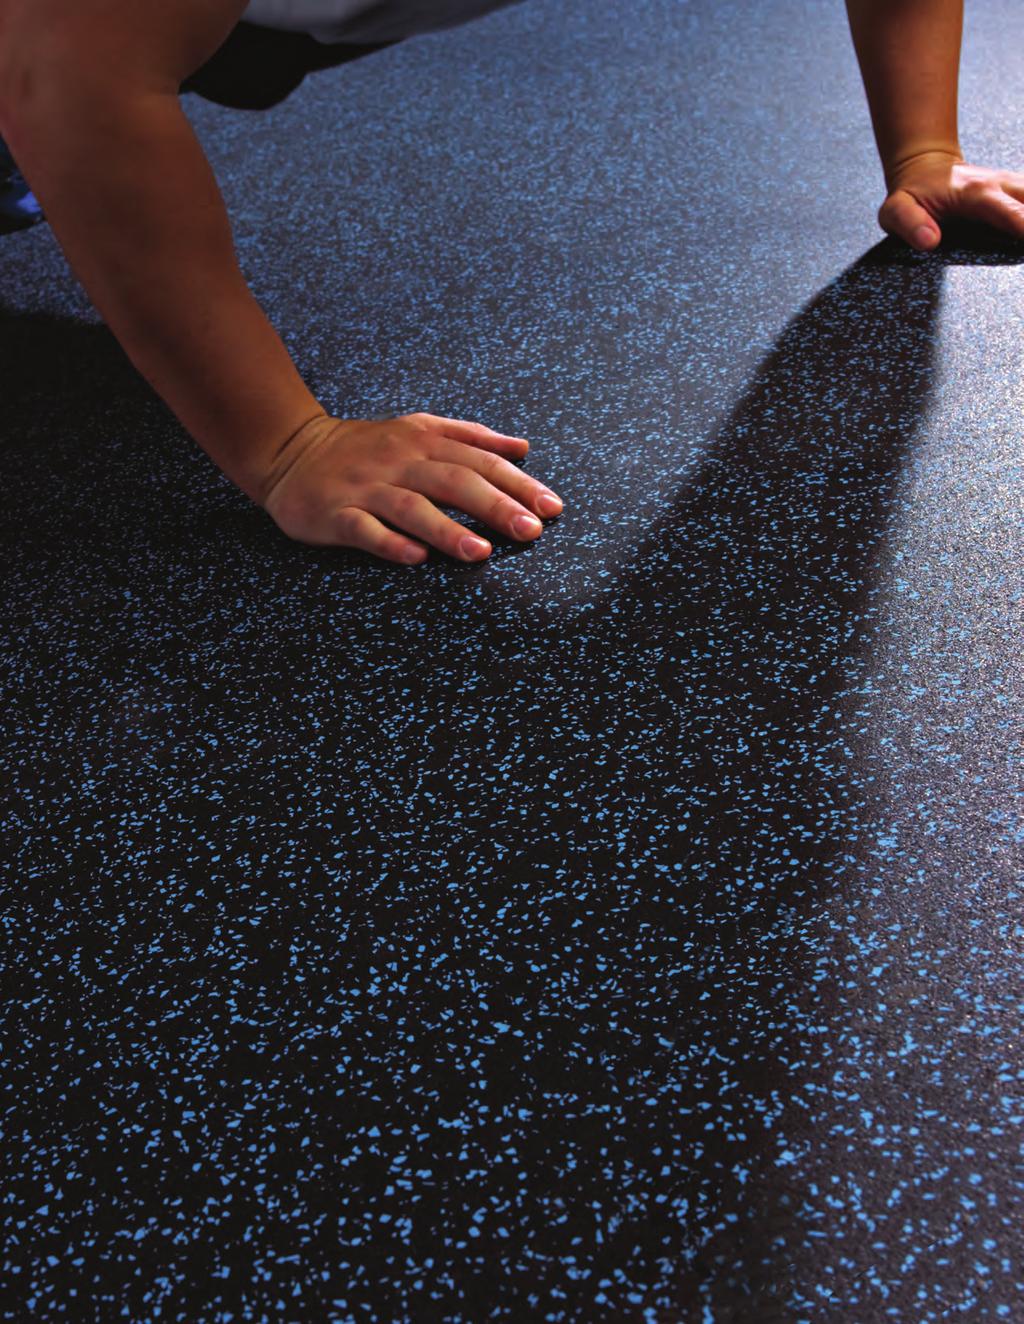 ROLL FLOORING Durable, Virtually Seamless Shock Absorbing Flooring The FIT-TECH composite roll flooring offers wear resistance and stable footing making it the ultimate choice for top training